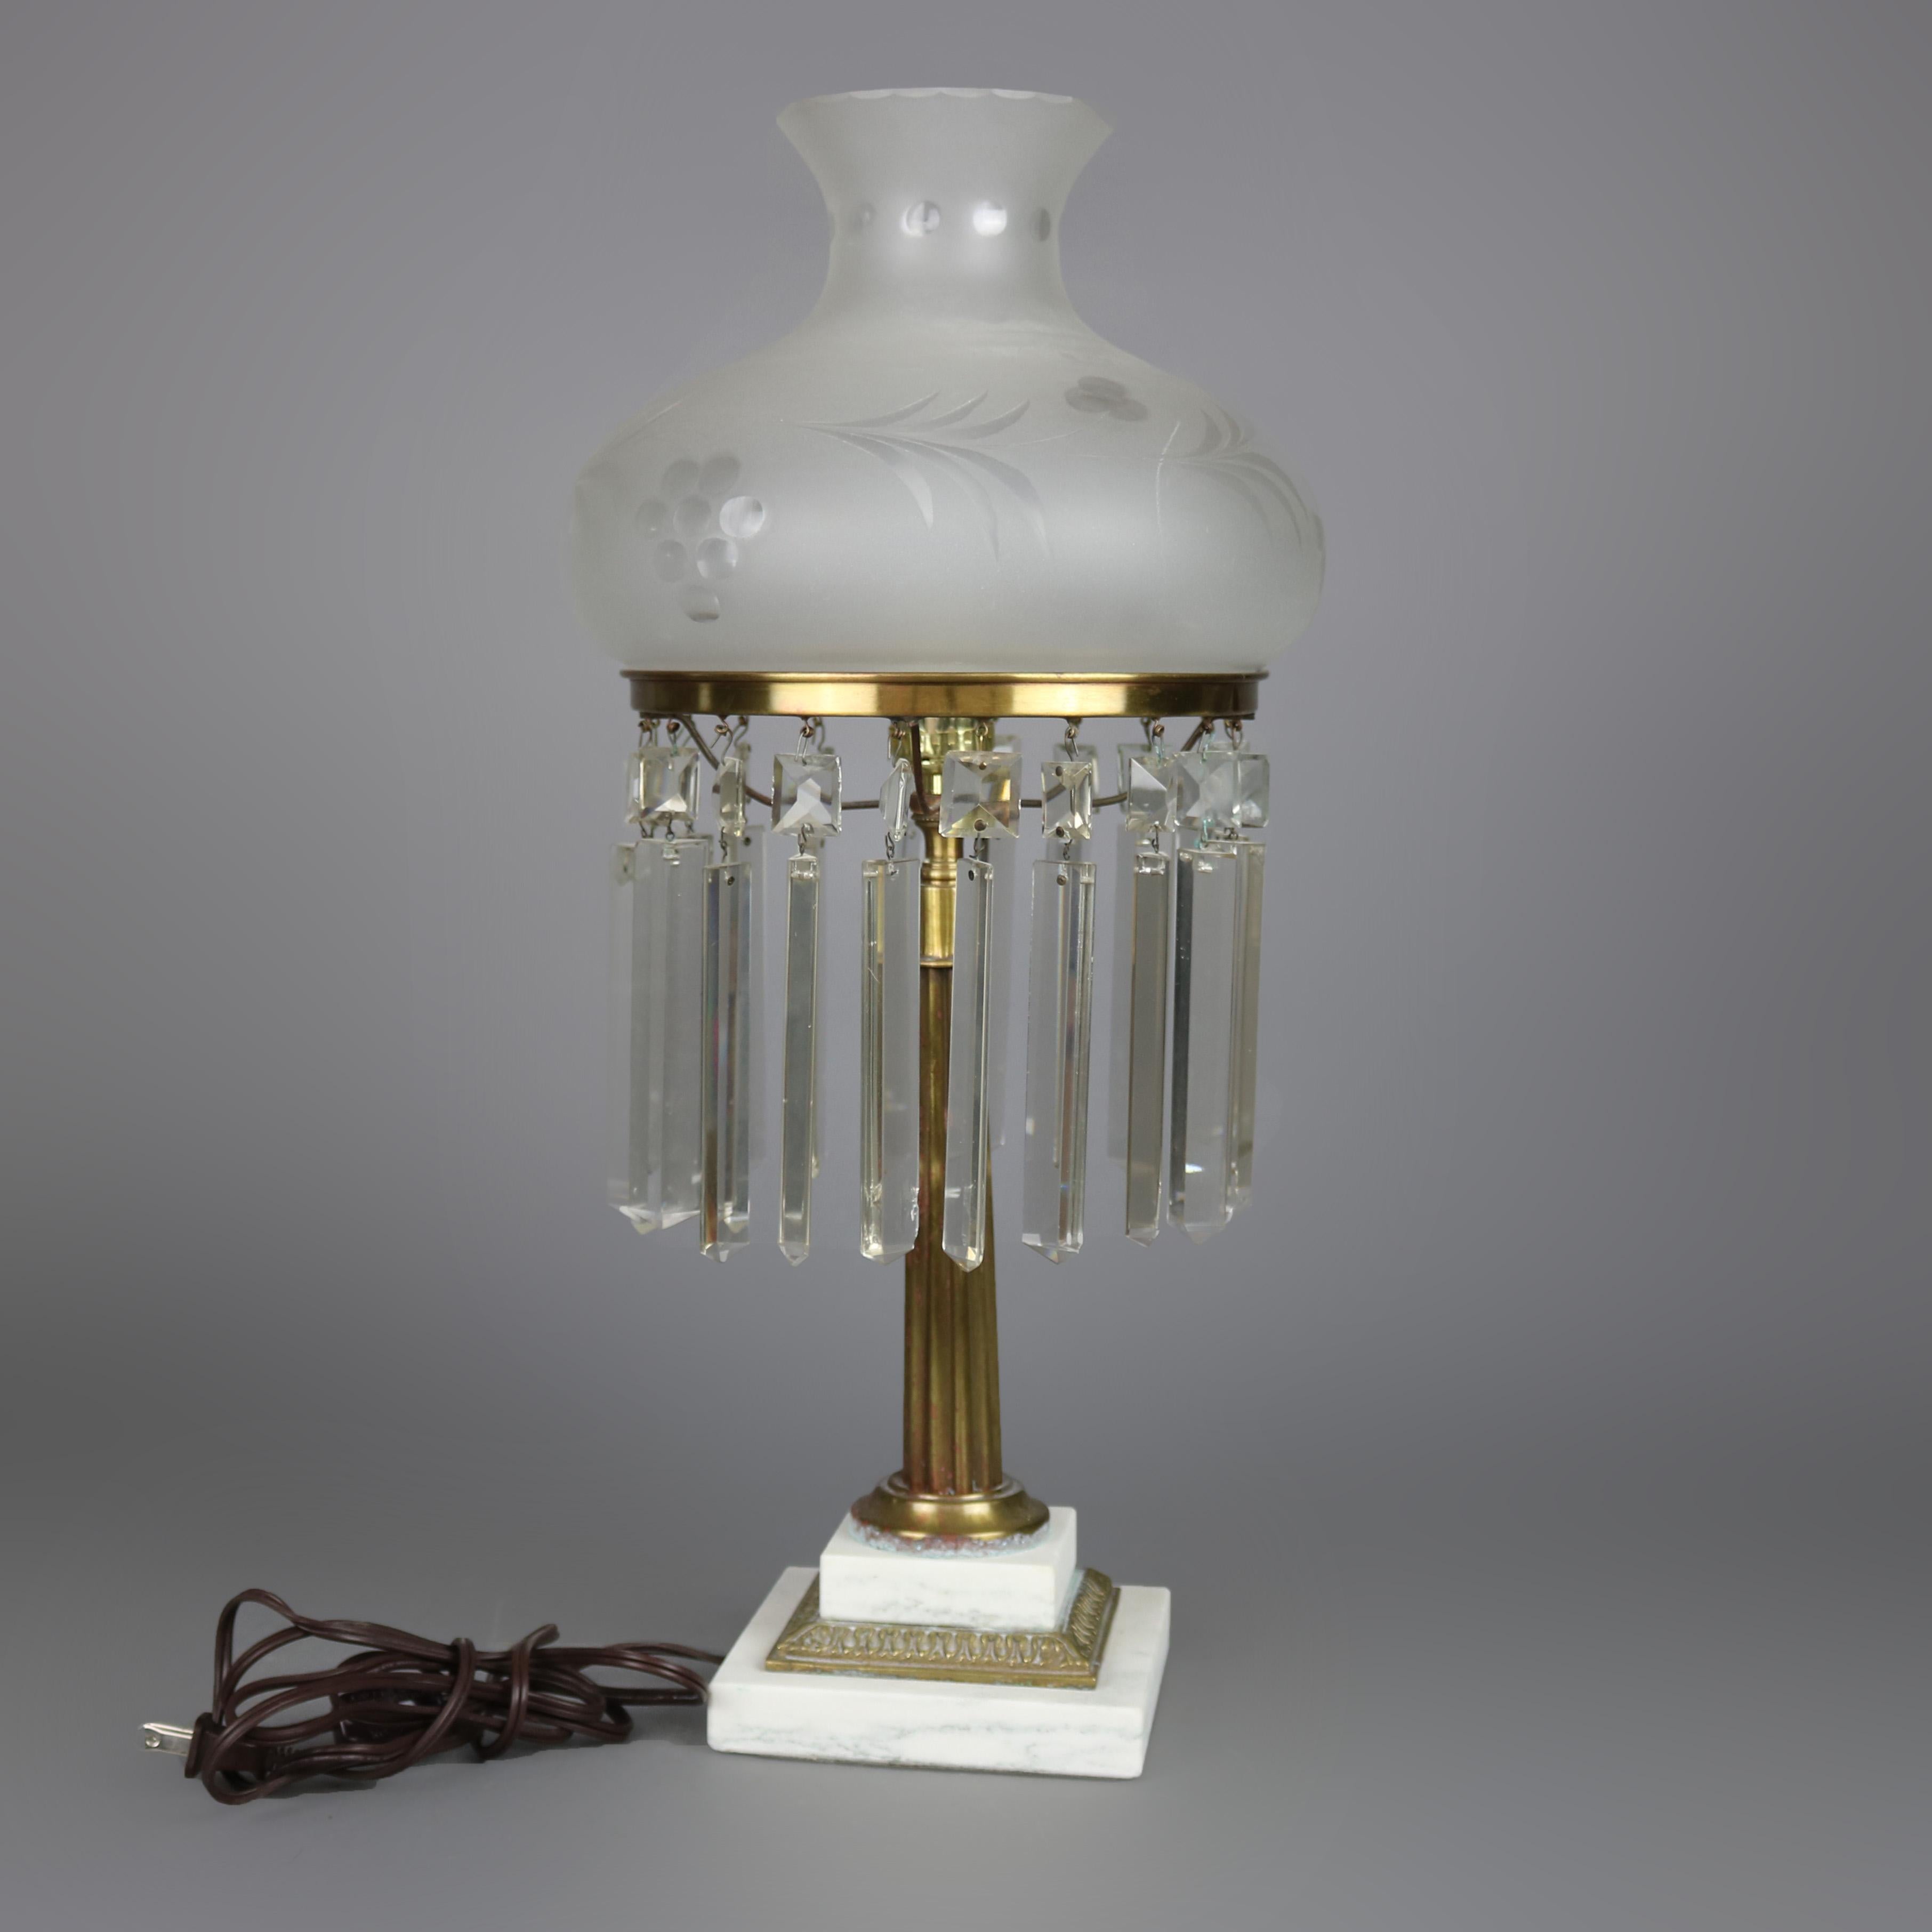 Cast Antique Sinumbra Style Gilt Metal and Marble Base Table Lamp with Prisms